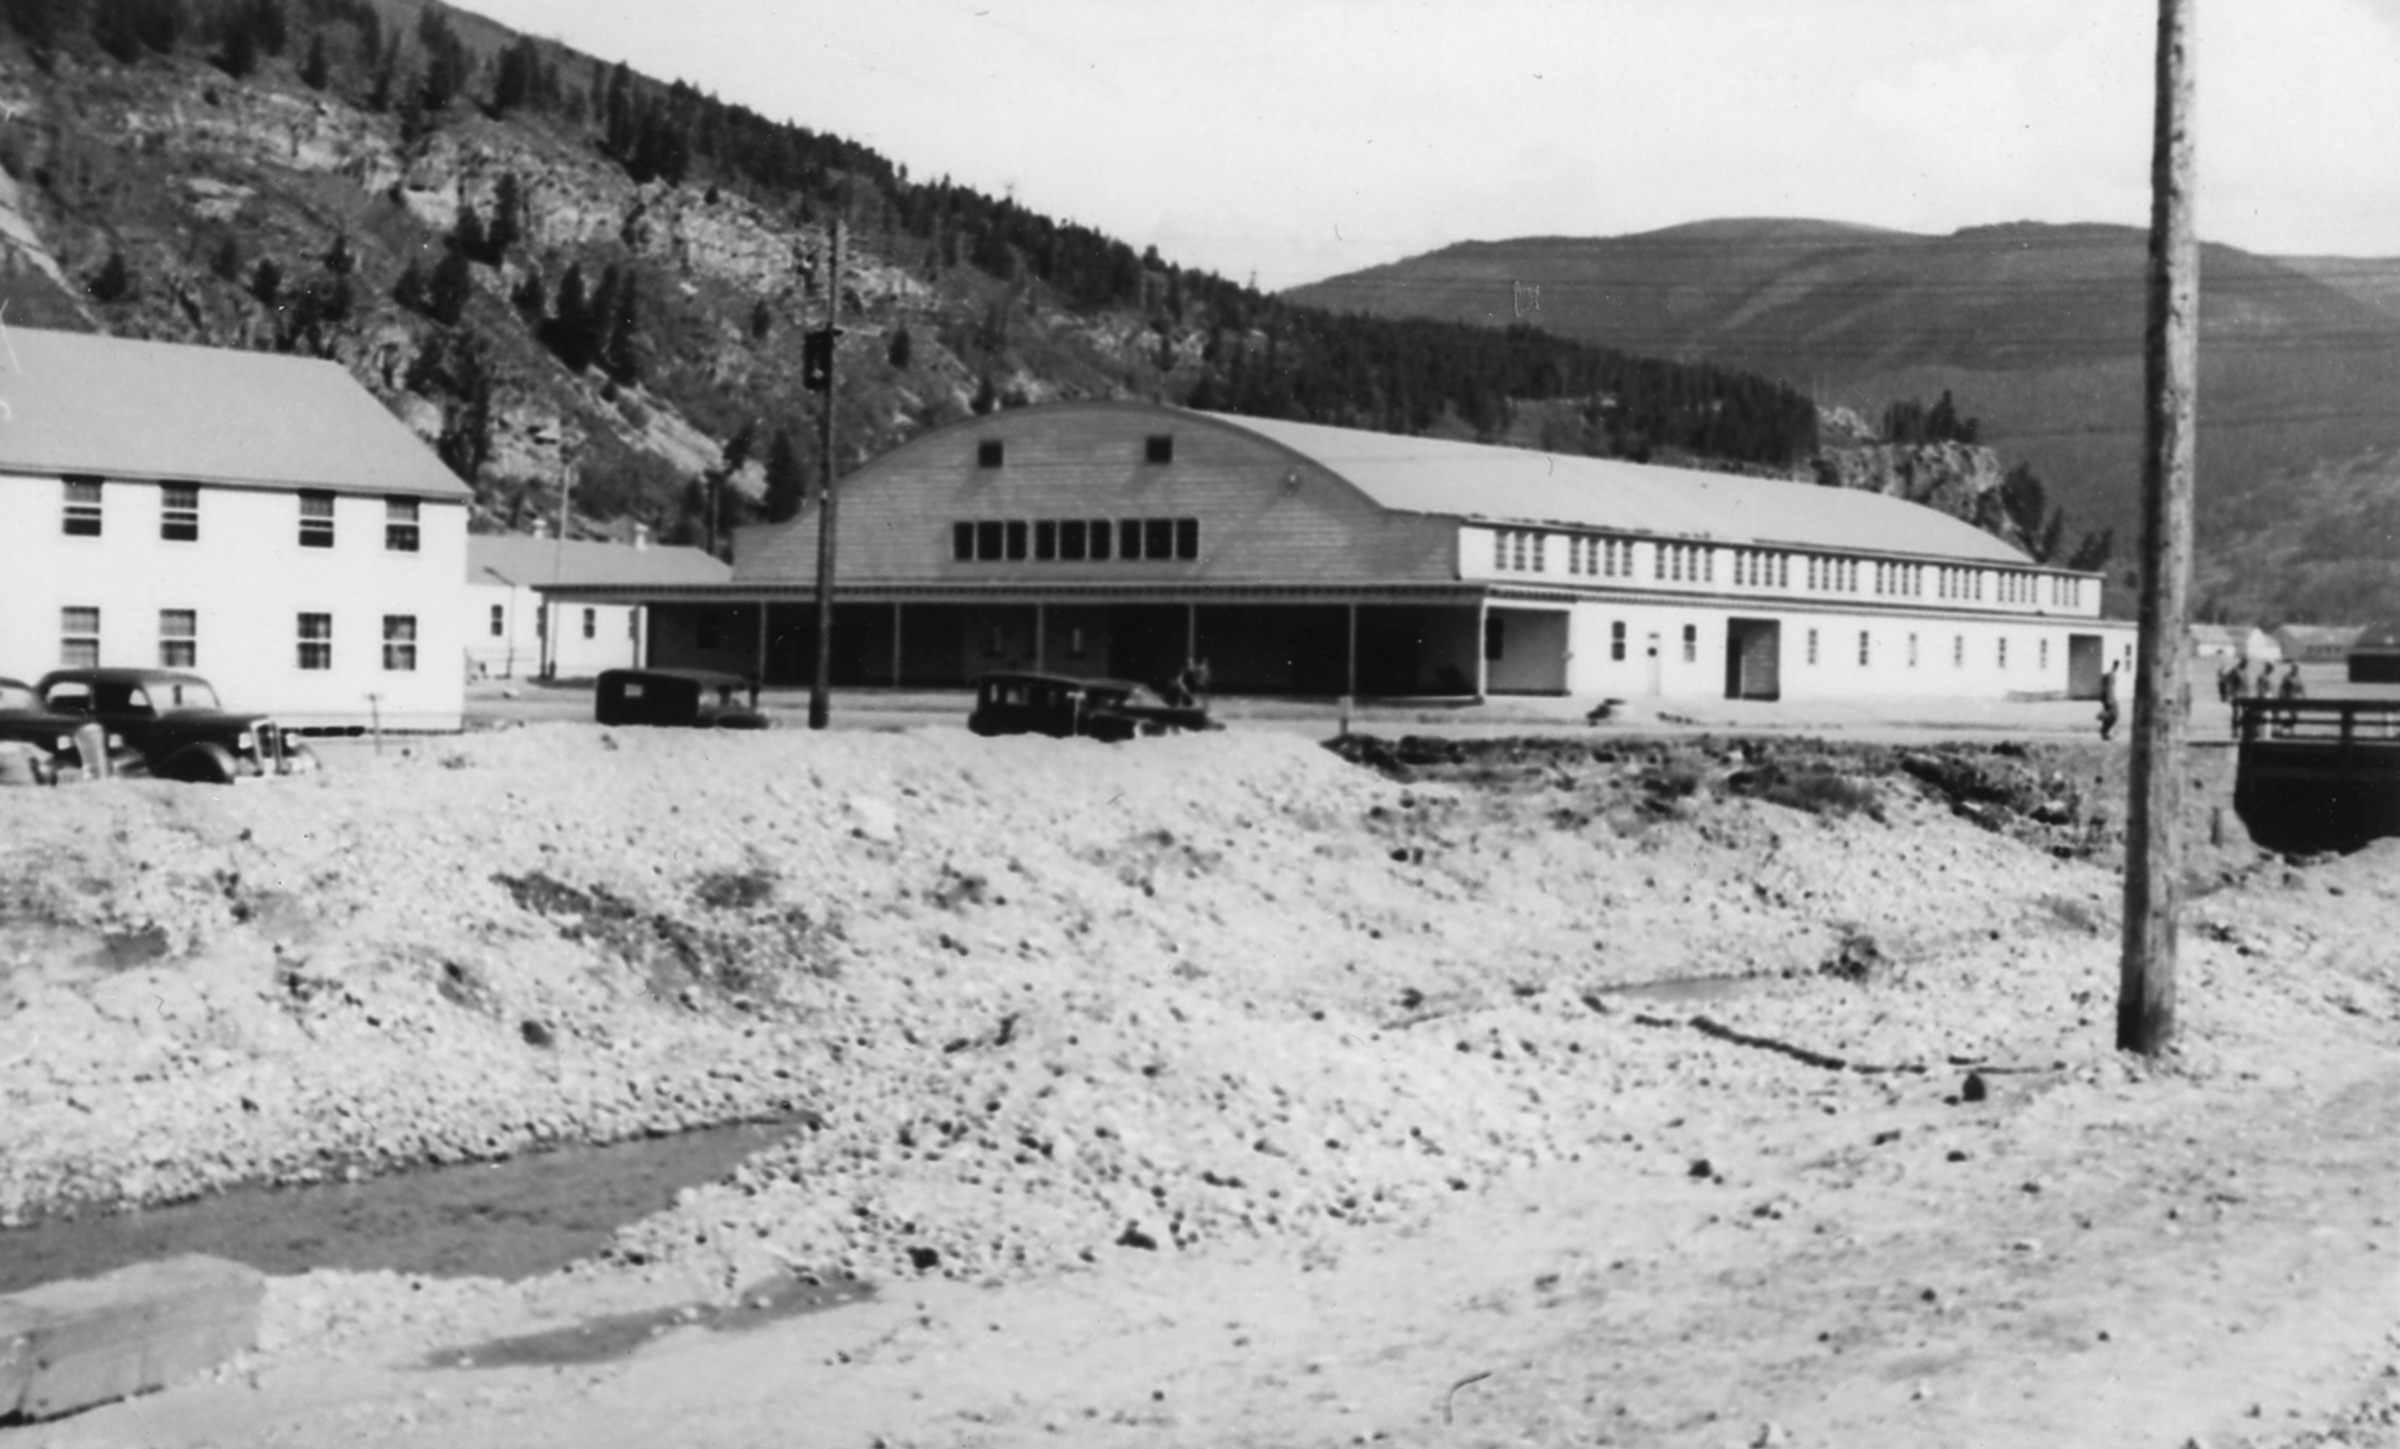 A larger building with an arced roof in the center of Camp Hale.